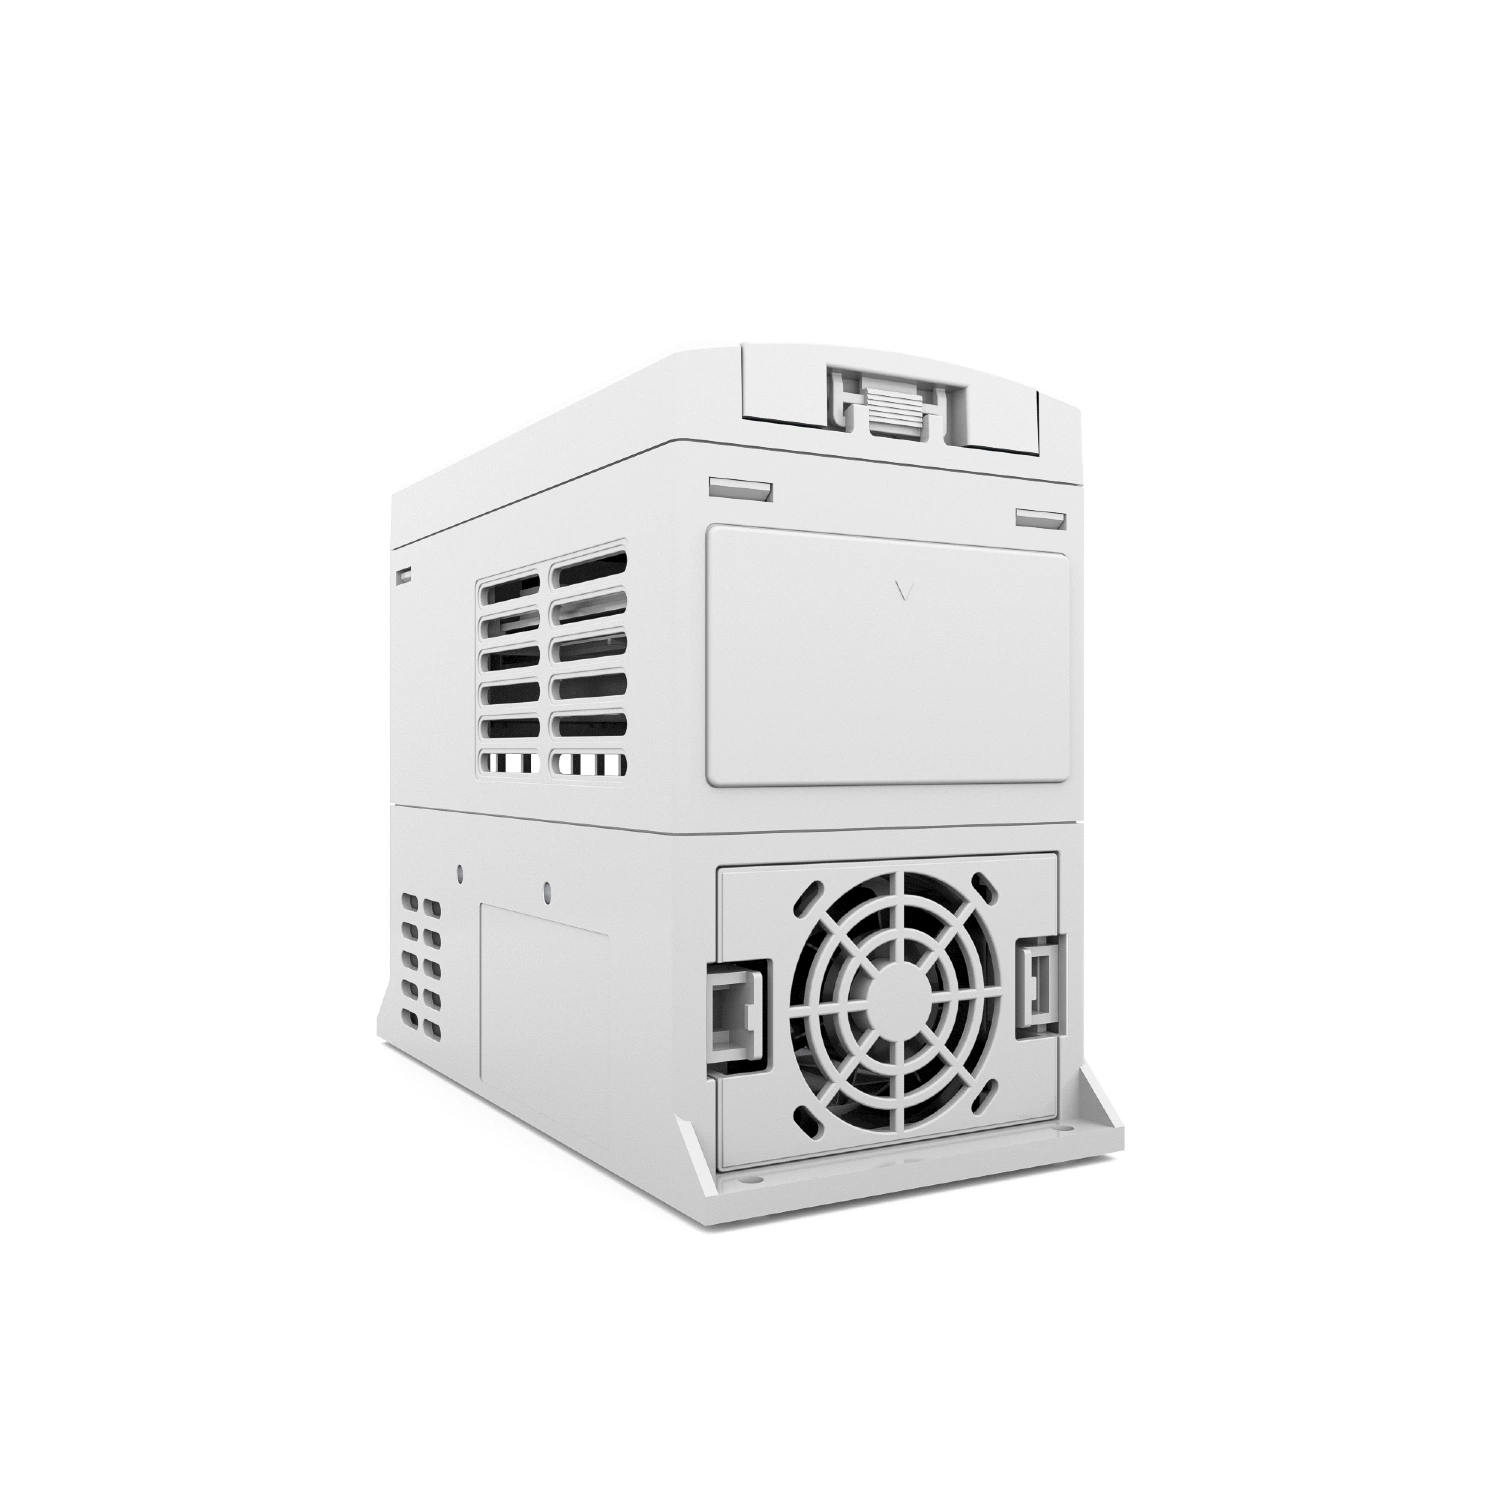 Gtake General Purpose AC Variable Frequency Drives for Fan & Pump